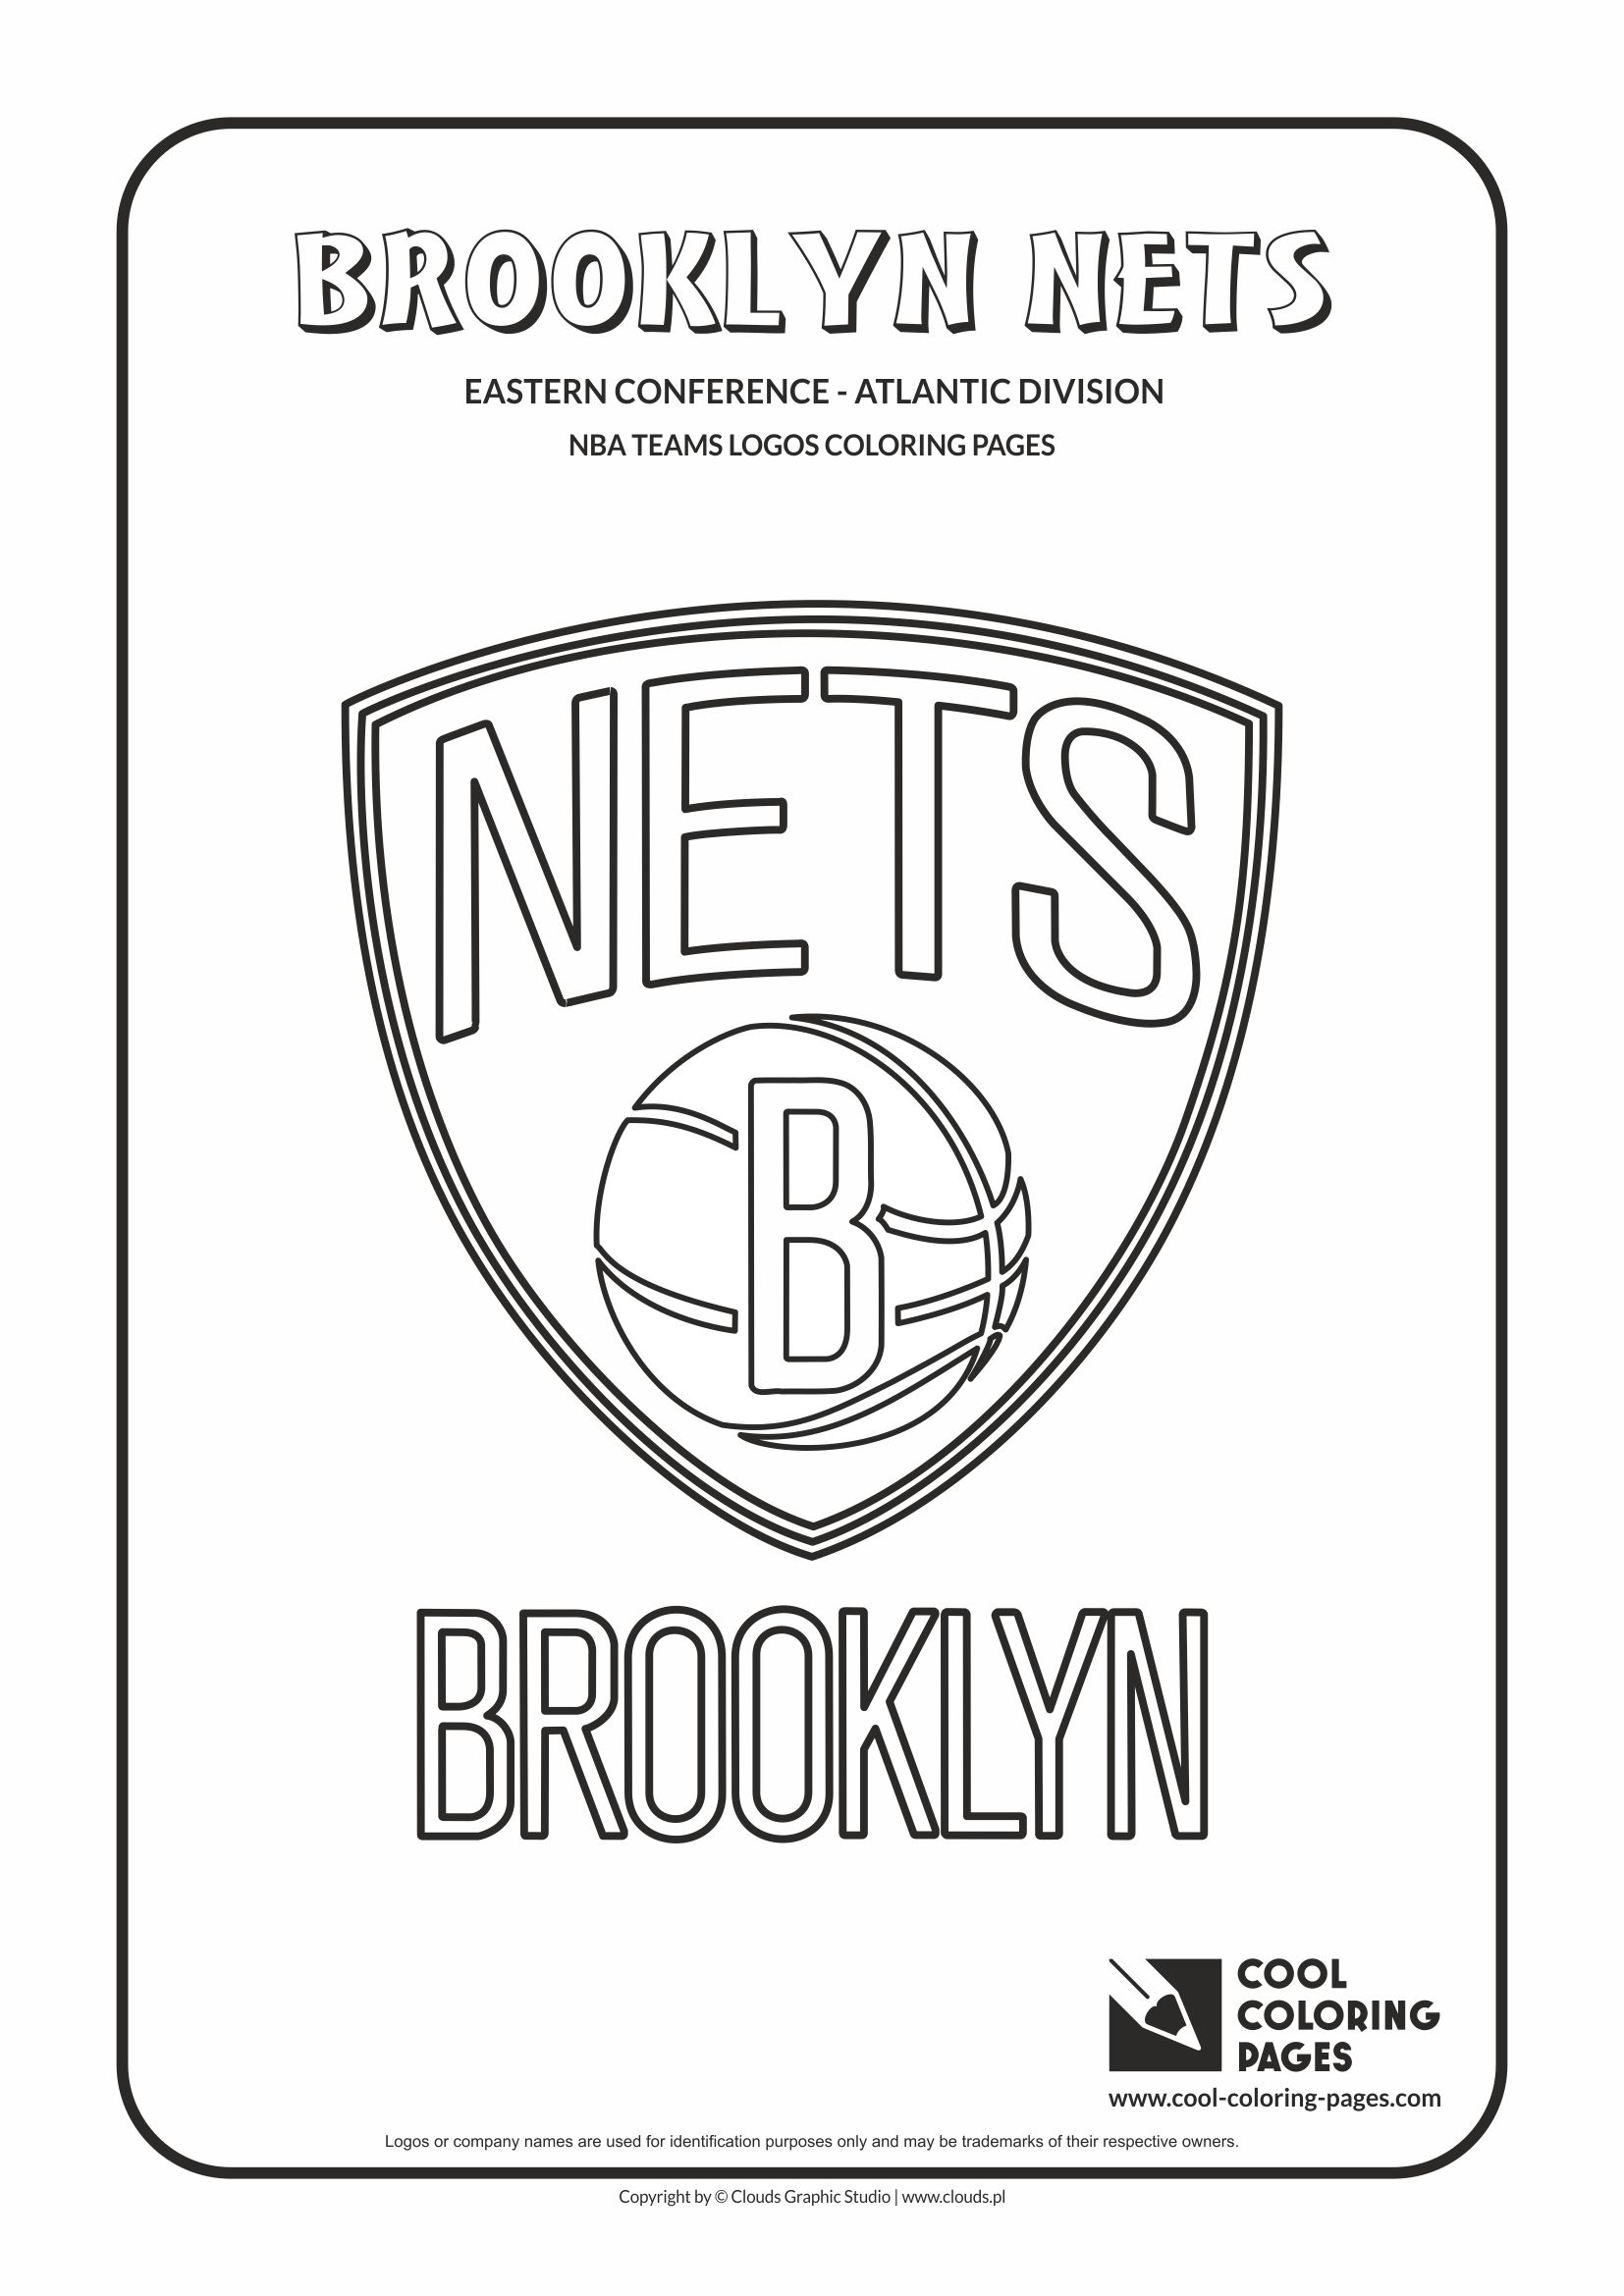 Cool coloring pages brooklyn nets